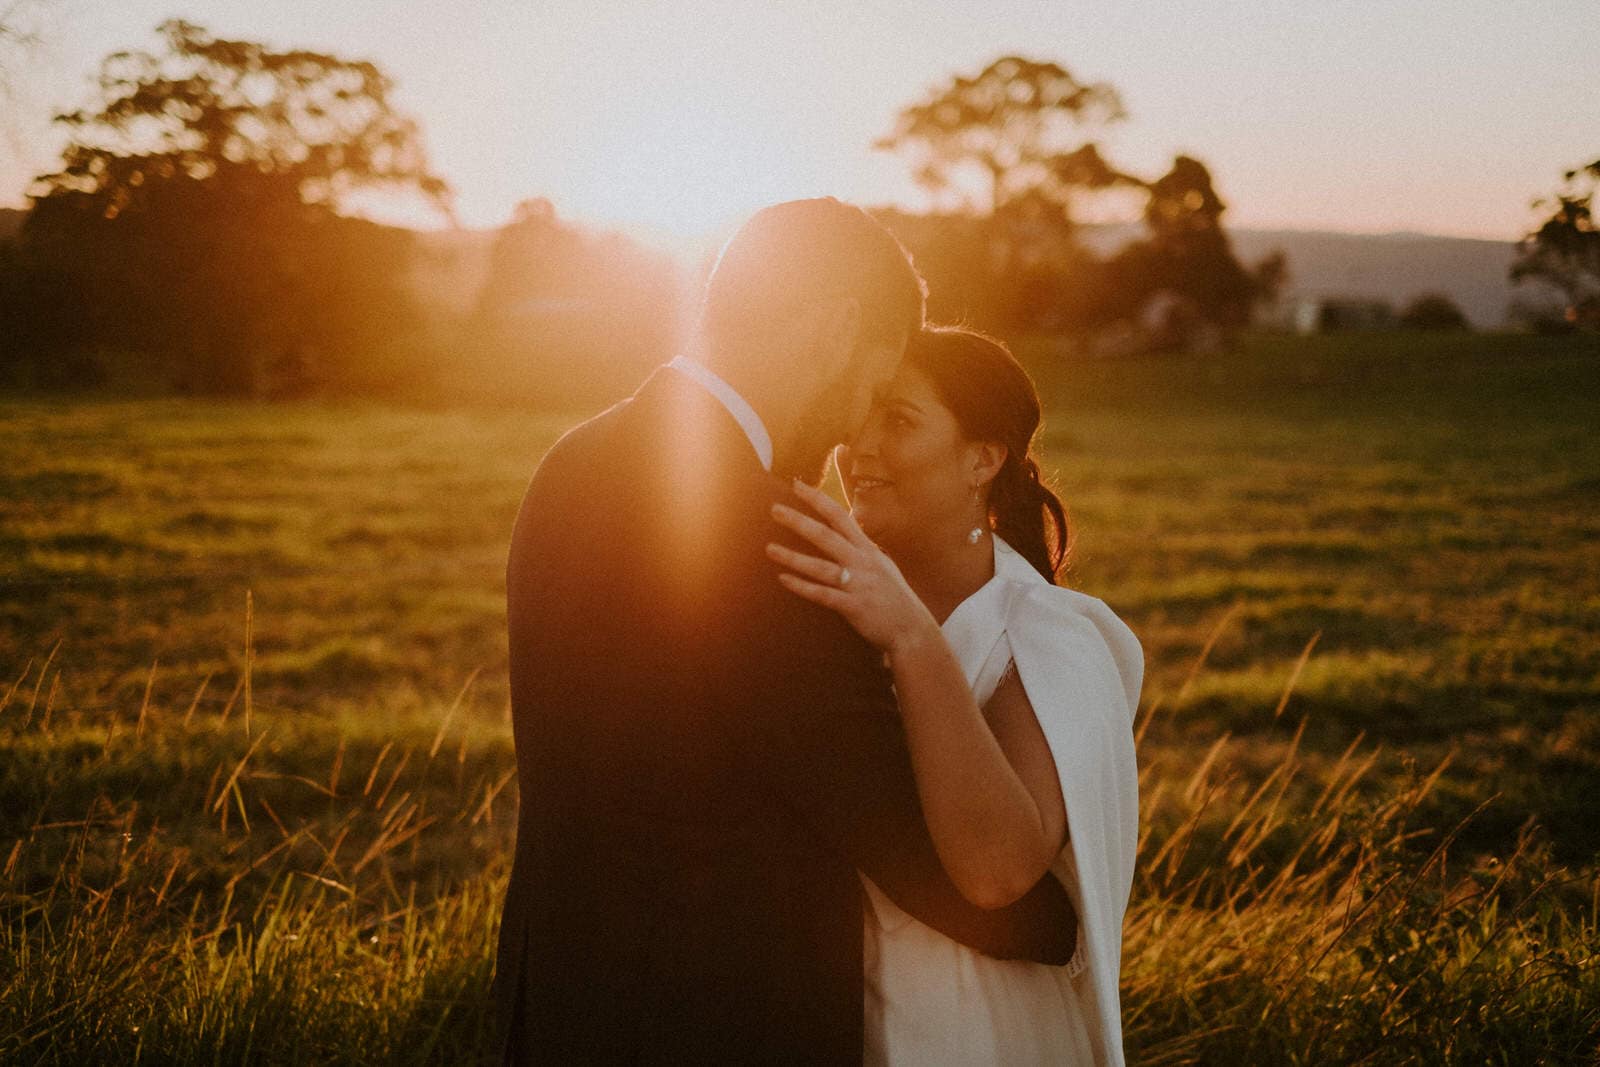 Sunshine Coast wedding photographer, Bride and groom embracing at sunset with golden light backlighting the couple after their ceremony at Maleny Retreat.